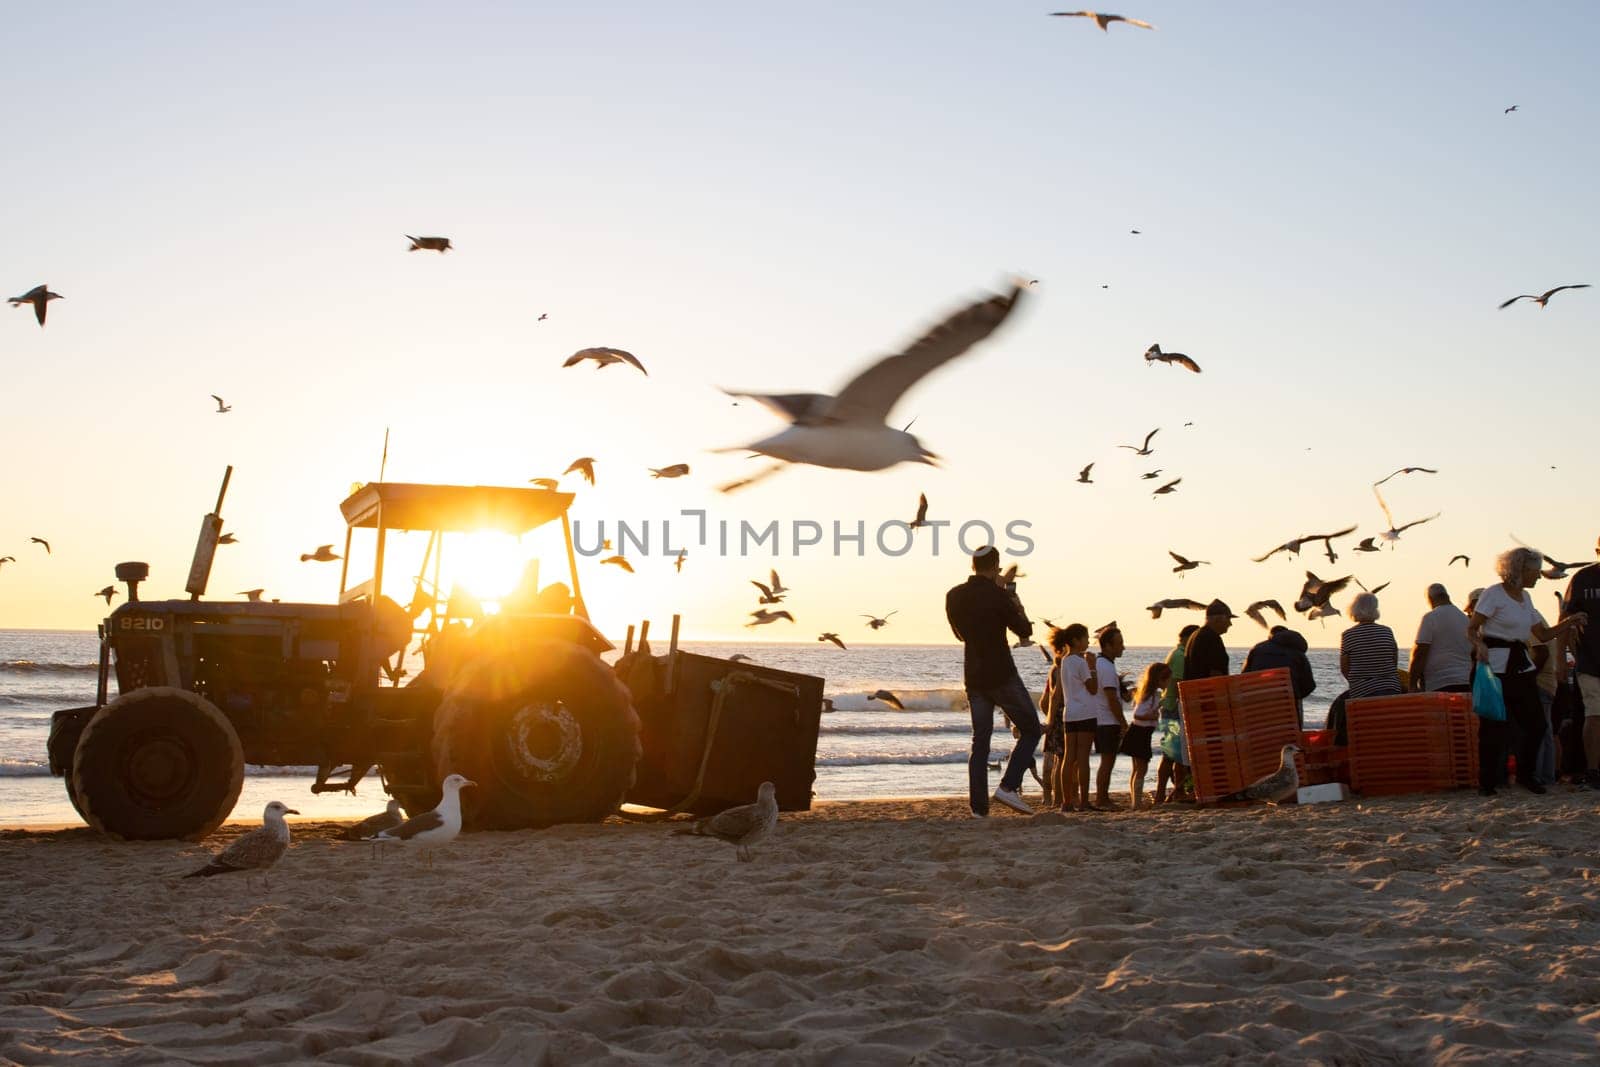 14 october 2022 Lisbon, Portugal: Men and women are selling freshly caught fish on the beach at bright sunset. Mid shot